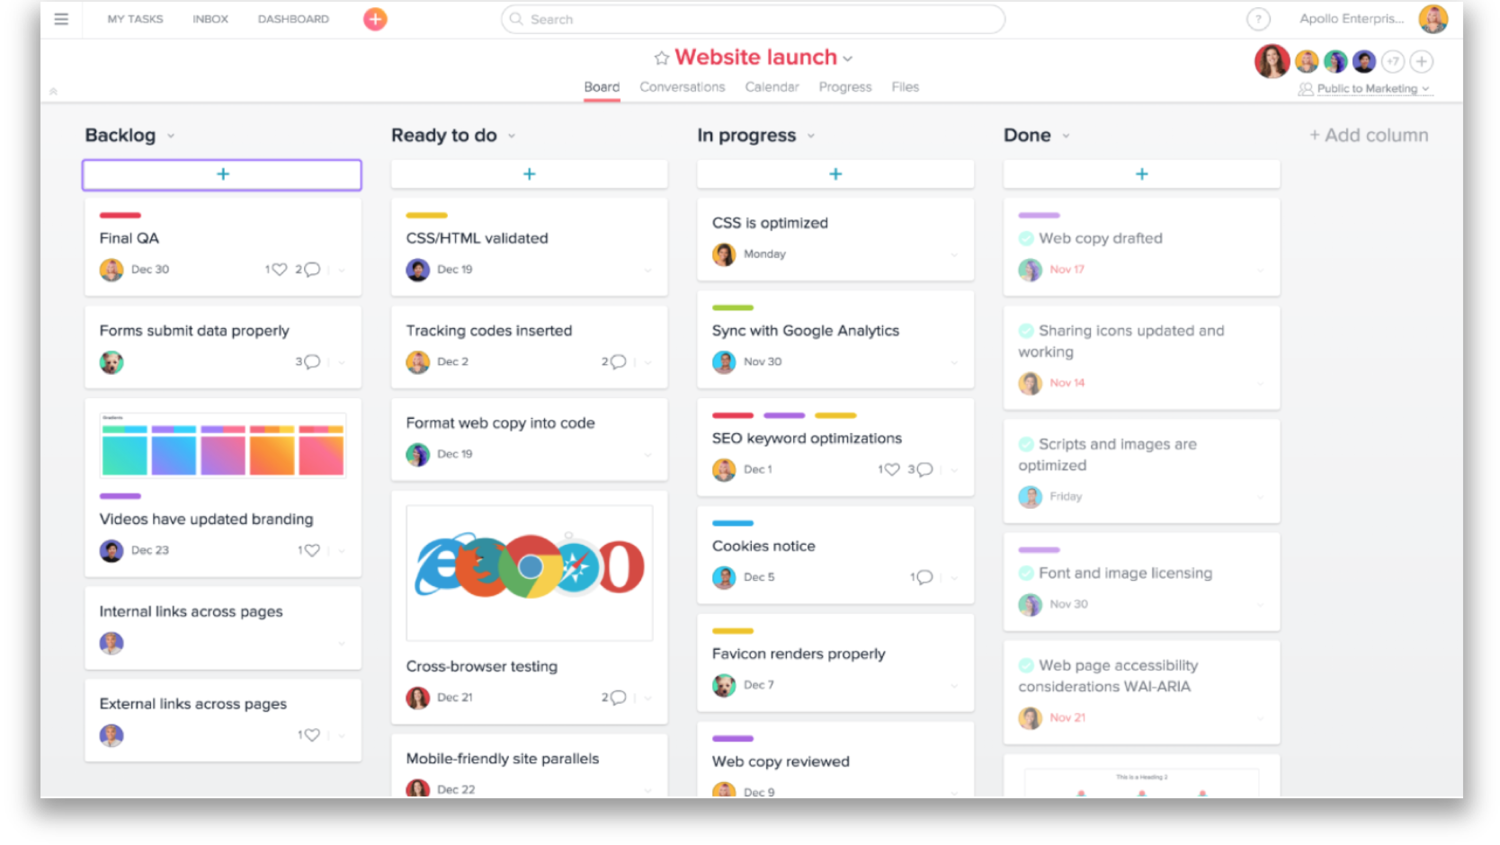 Asana is a tool that can help in the information exchange during the customer-centric design process